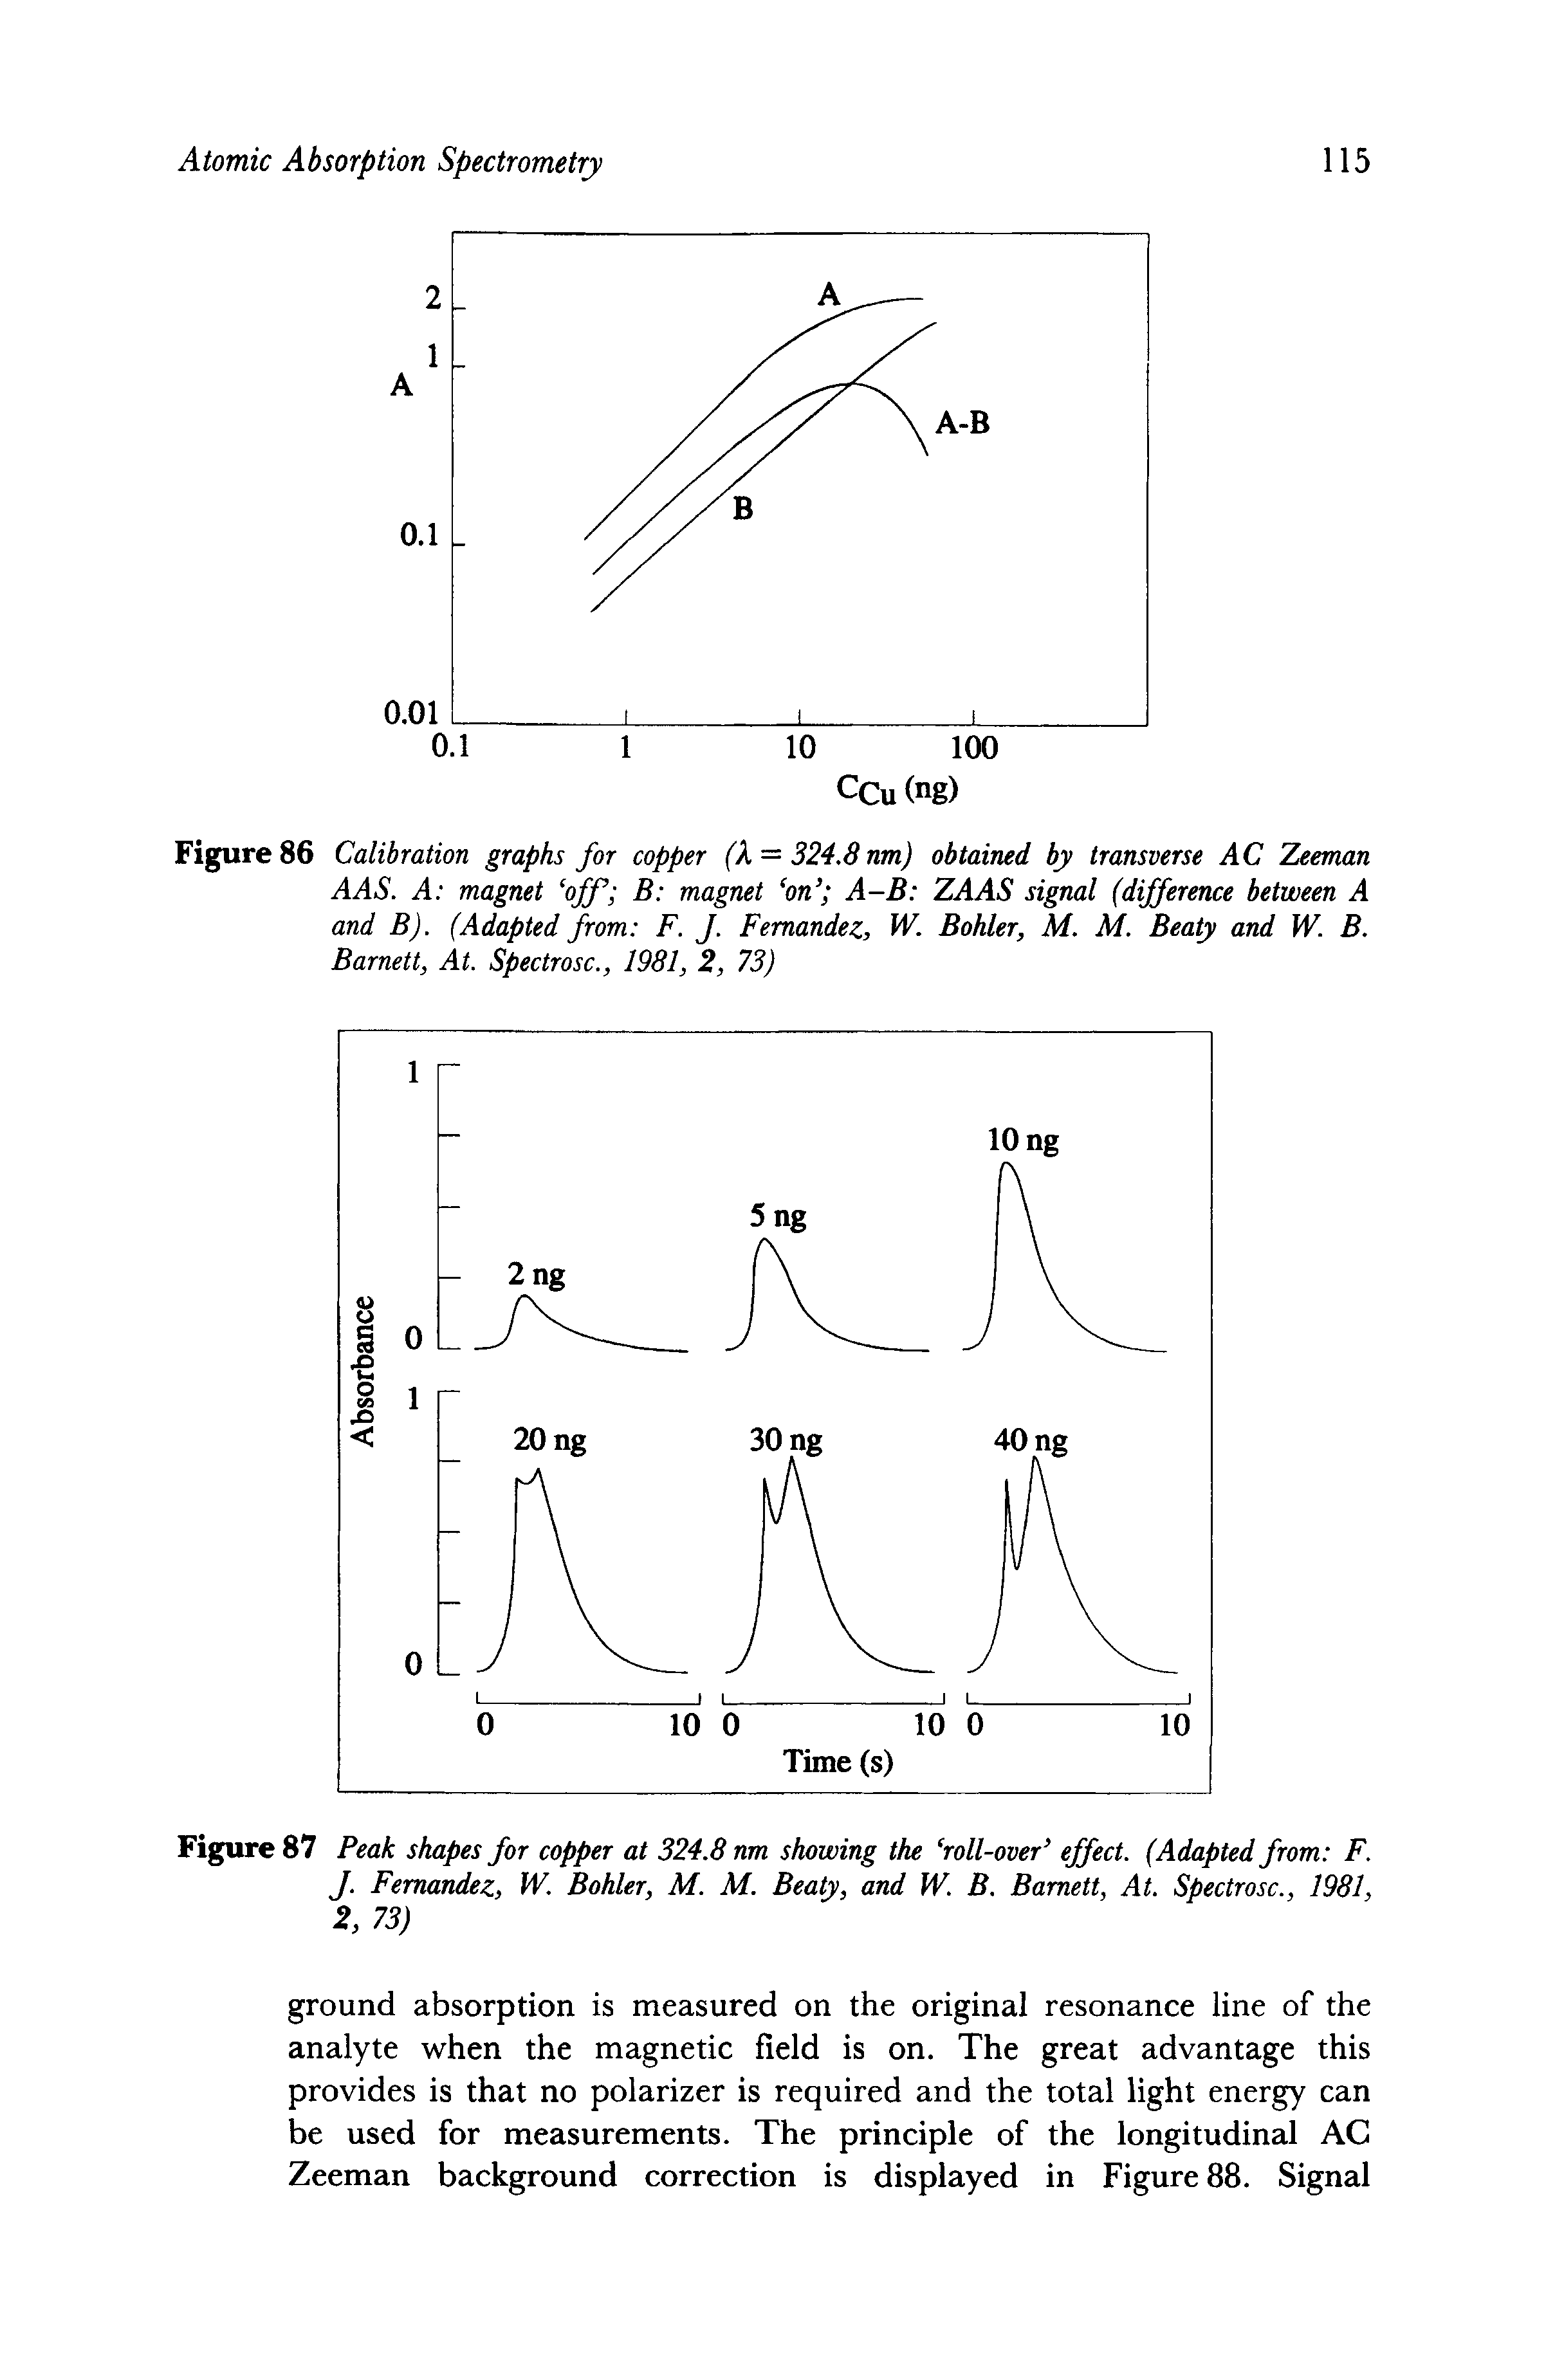 Figure 86 Calibration graphs for copper (X = 324.8 nm) obtained by transverse AC Zeeman AAS. A magnet off B magnet on A-B ZAAS signal (difference between A and B). (Adapted from F. J. Fernandez, W. Bolder, M. M. Beaty and W. B.